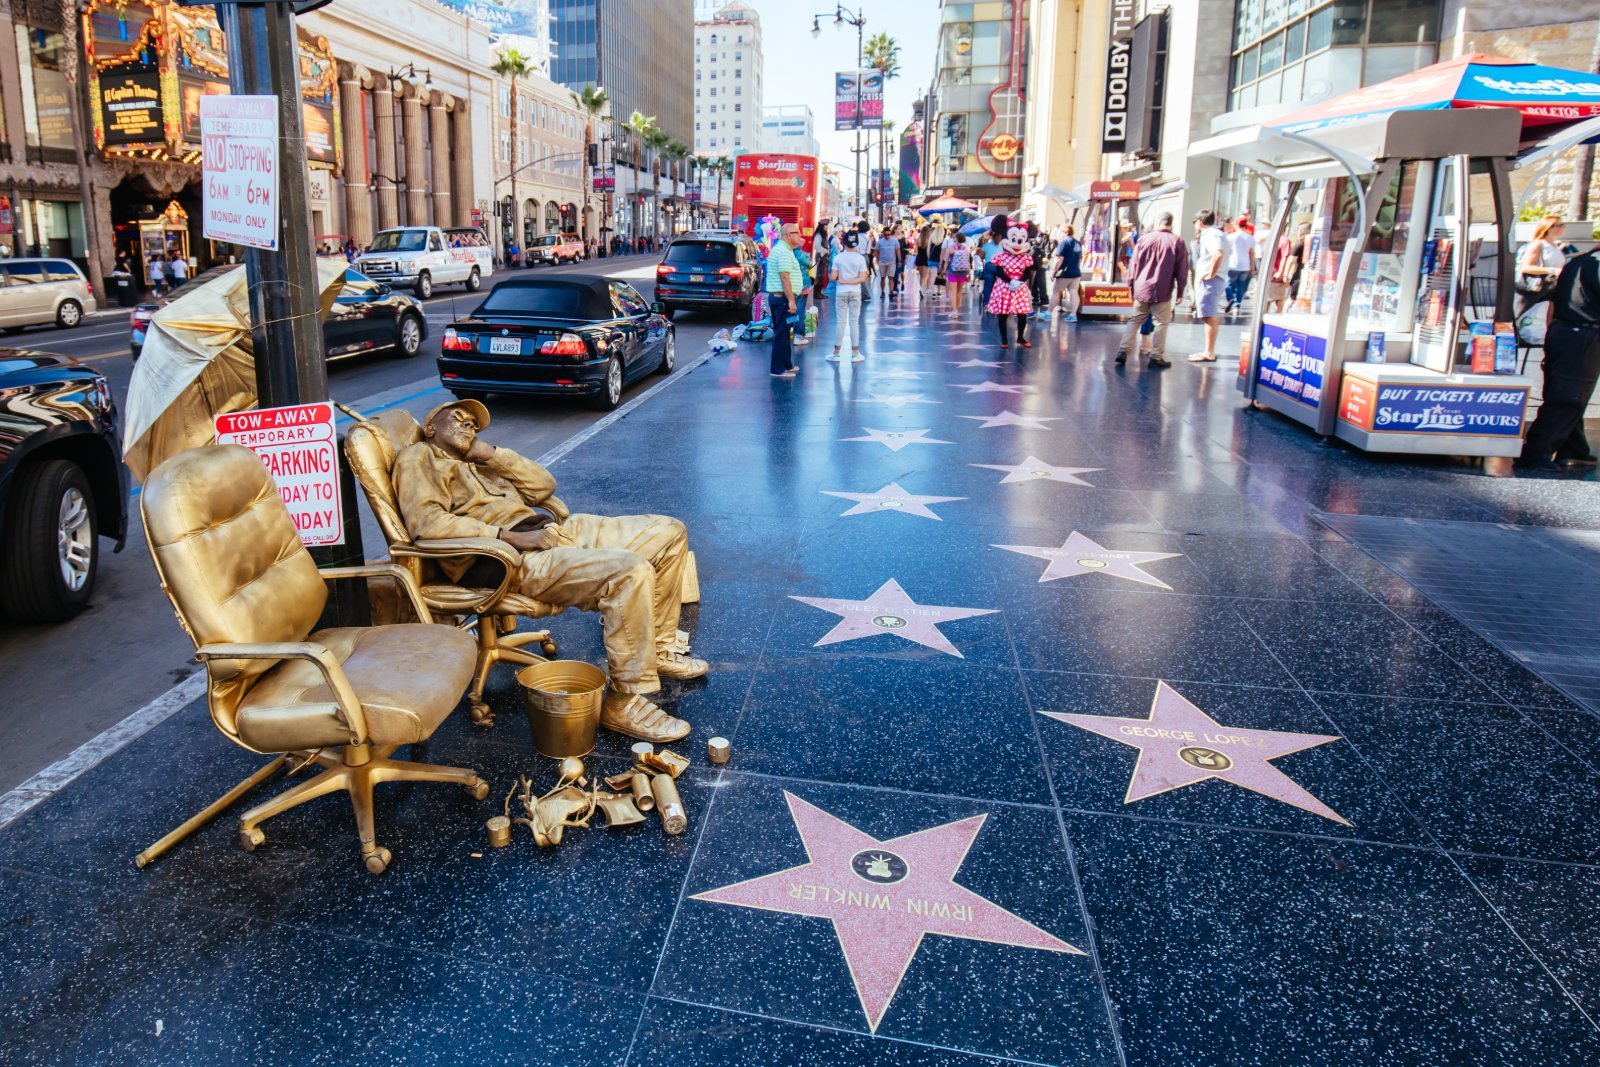 Image Credit: Shutterstock / FiledIMAGE <p><span>Walk among the stars on Hollywood’s famed sidewalks. It’s perfect for movie buffs but can be overwhelming with crowds and vendors. Plan to visit during quieter morning hours.</span></p>